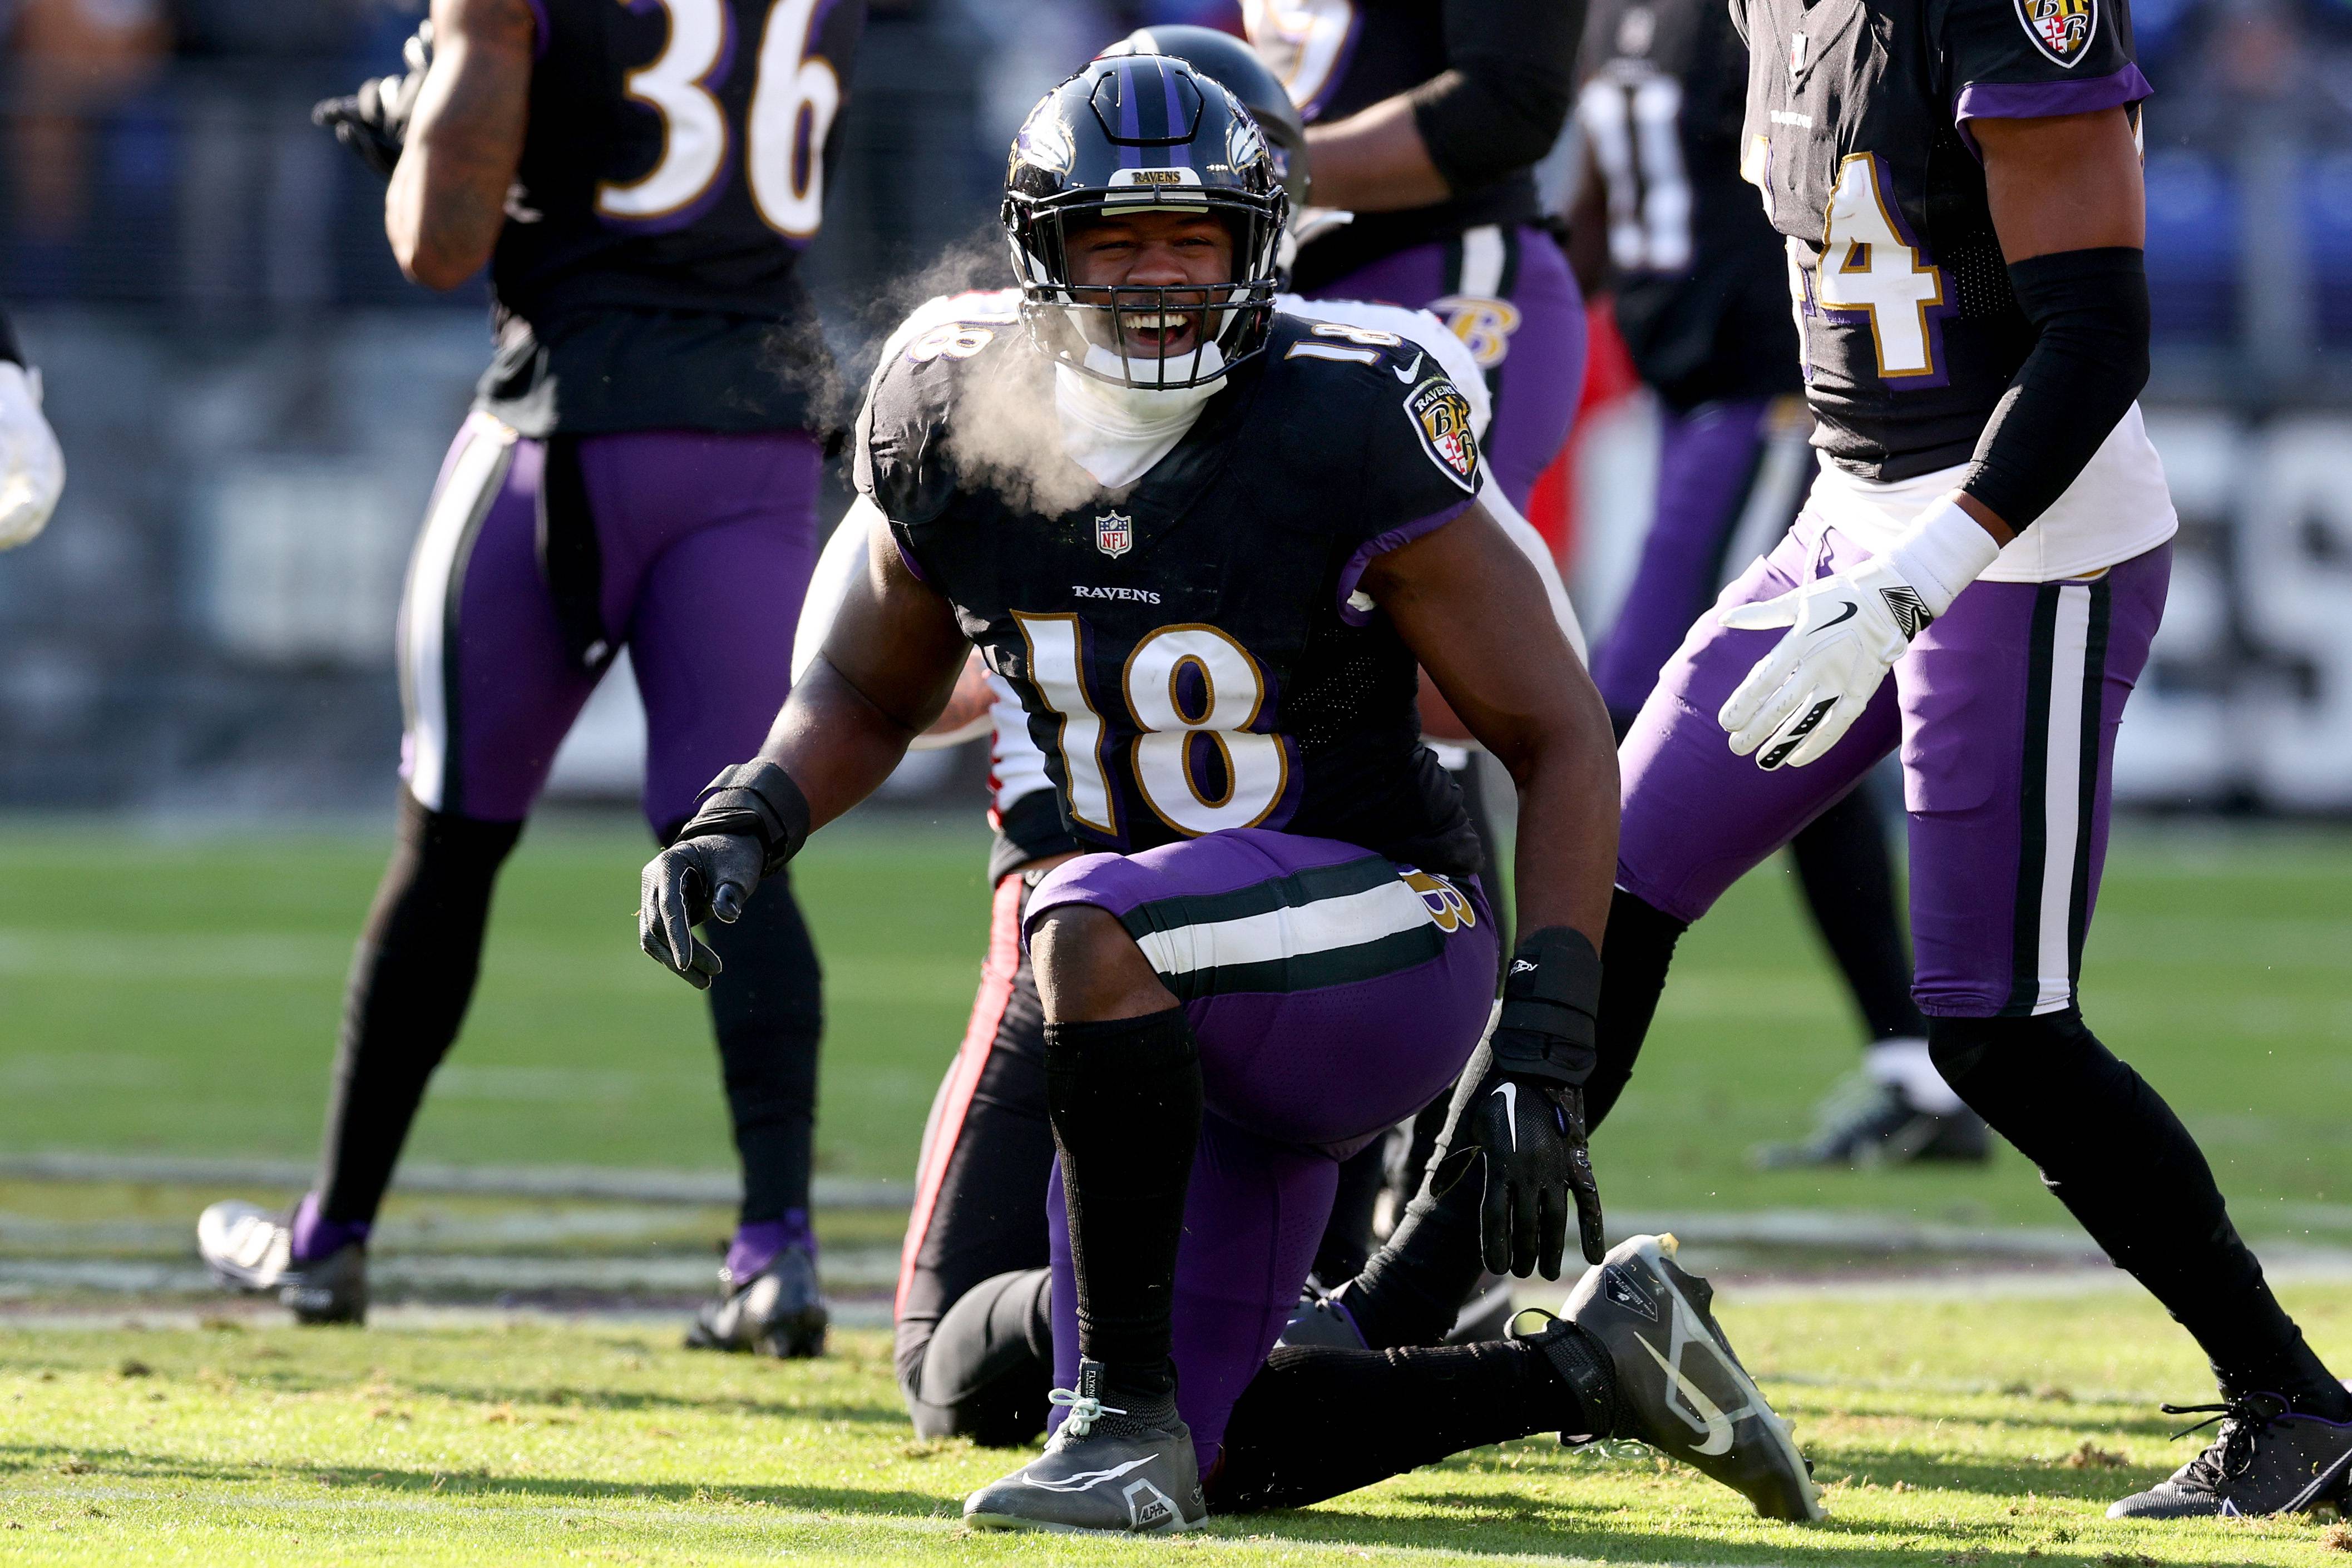 BALTIMORE, MARYLAND - DECEMBER 24: Roquan Smith #18 of the Baltimore Ravens celebrates after a play against the Atlanta Falcons during the first half of the game at M&T Bank Stadium on December 24, 2022 in Baltimore, Maryland.